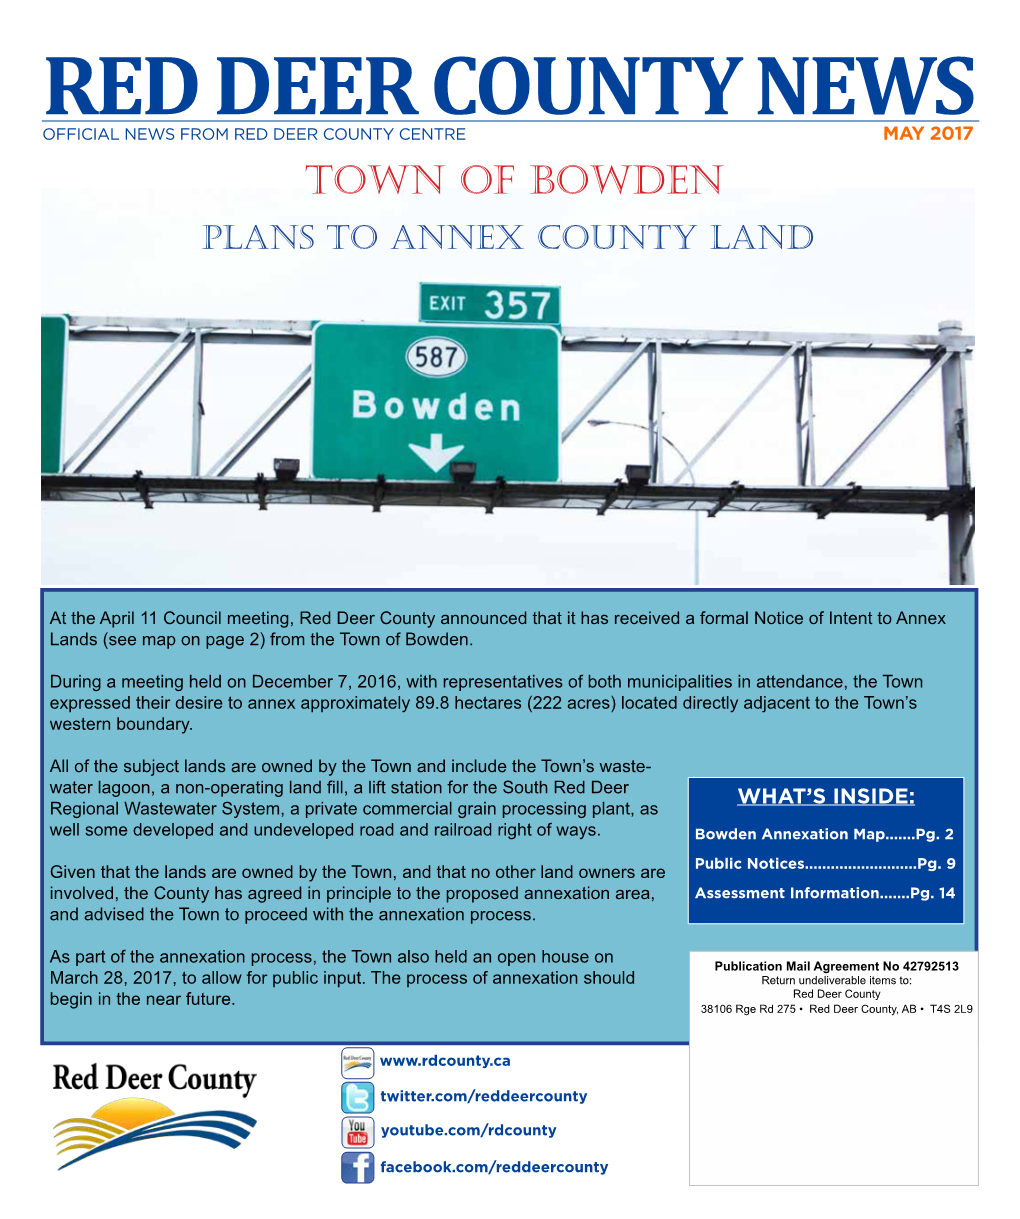 Town of Bowden Plans to Annex County Land